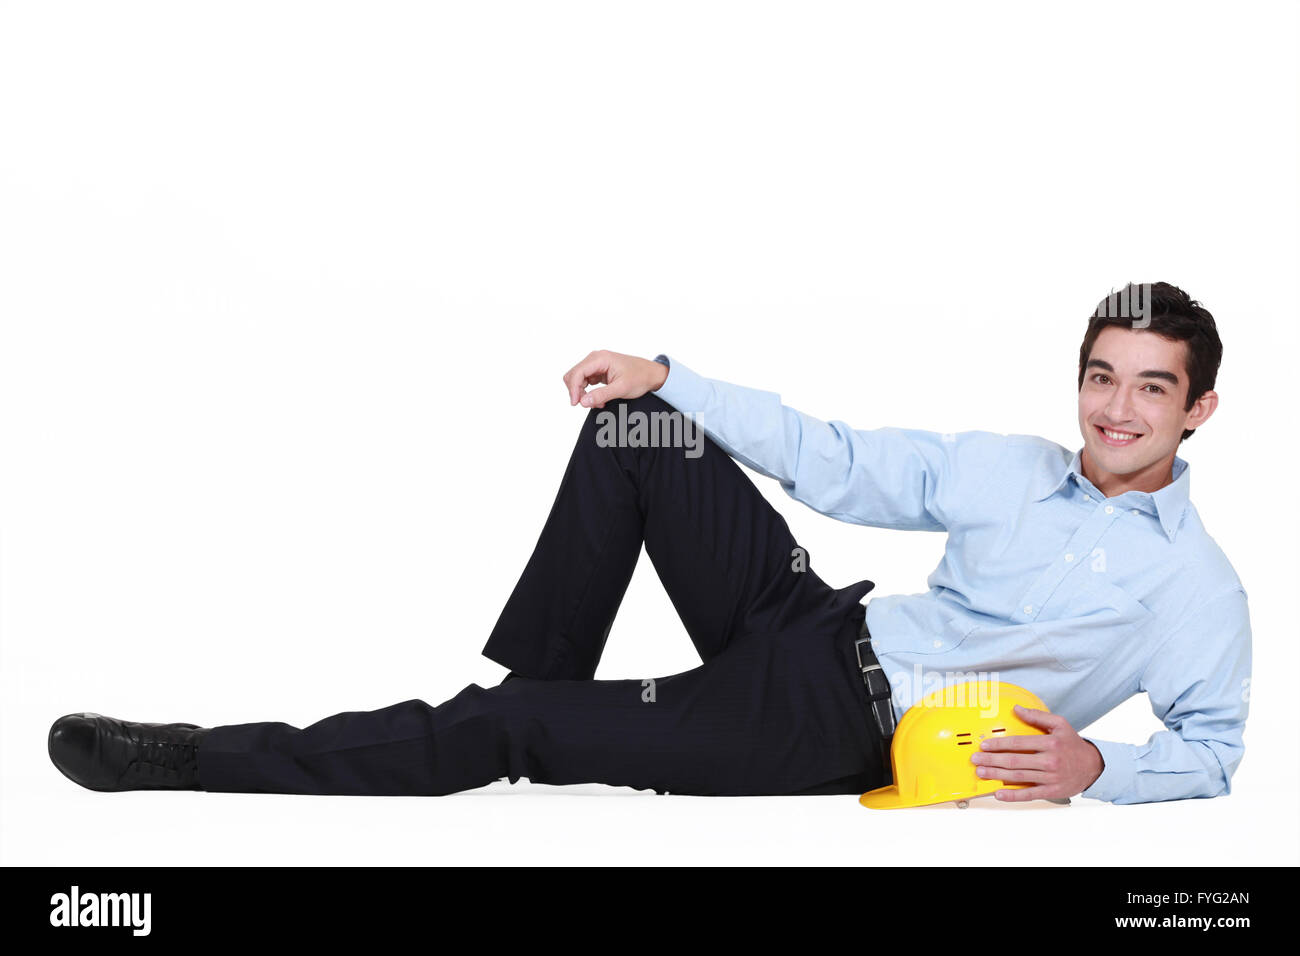 portrait of young foreman lying on floor with hard hat Stock Photo